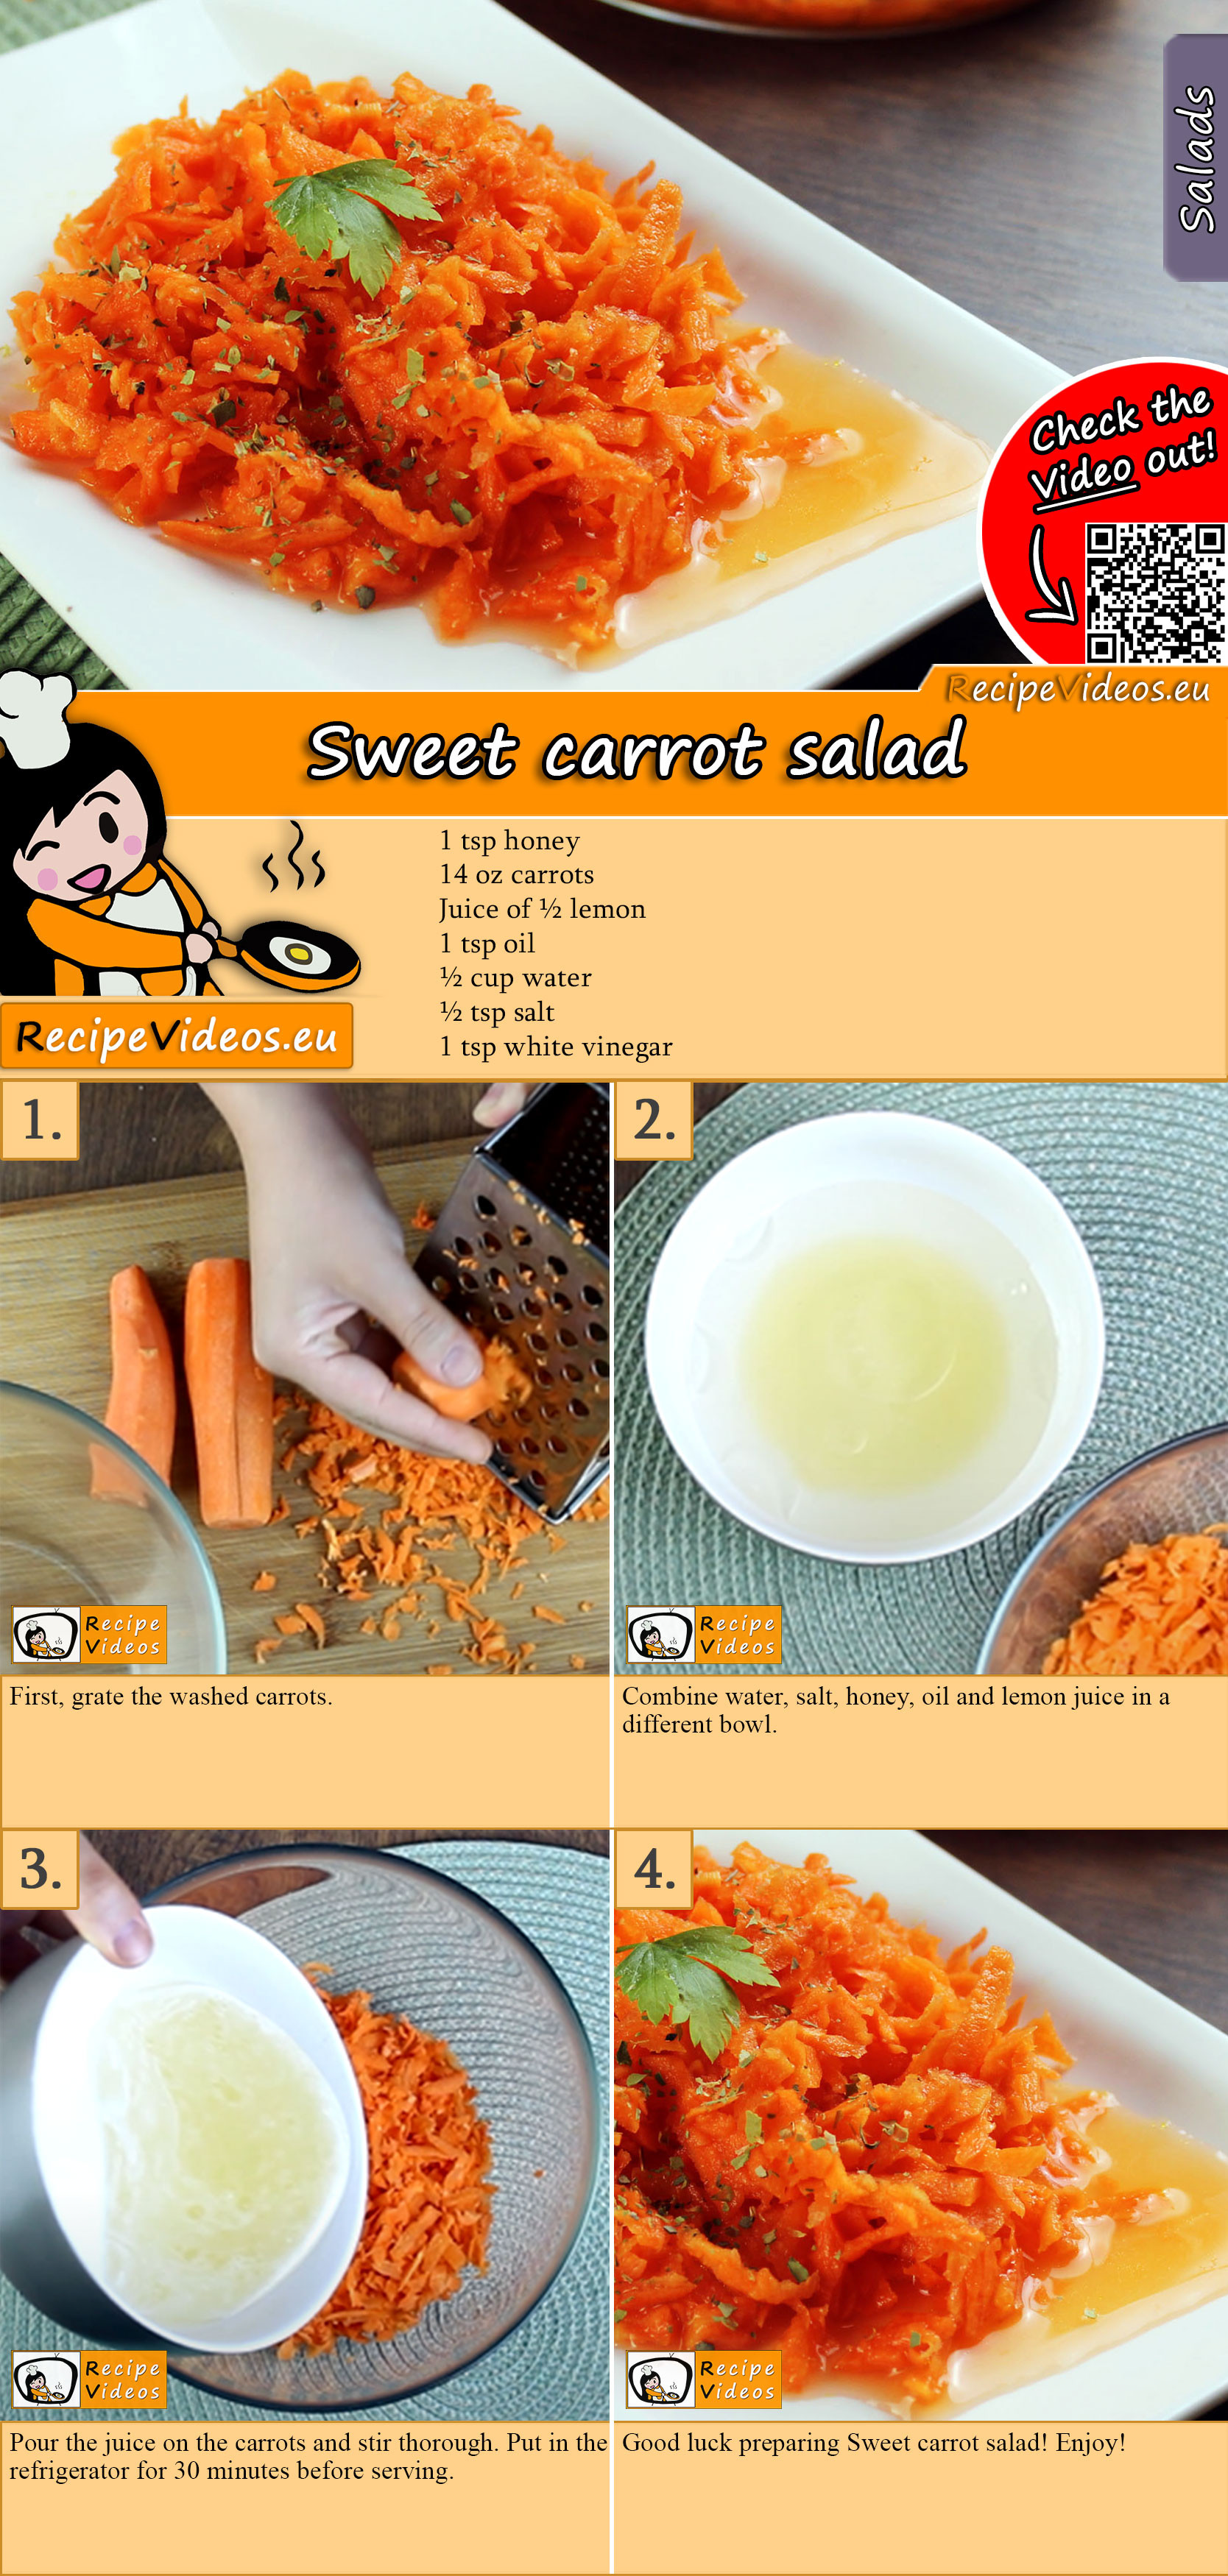 Sweet carrot salad recipe with video